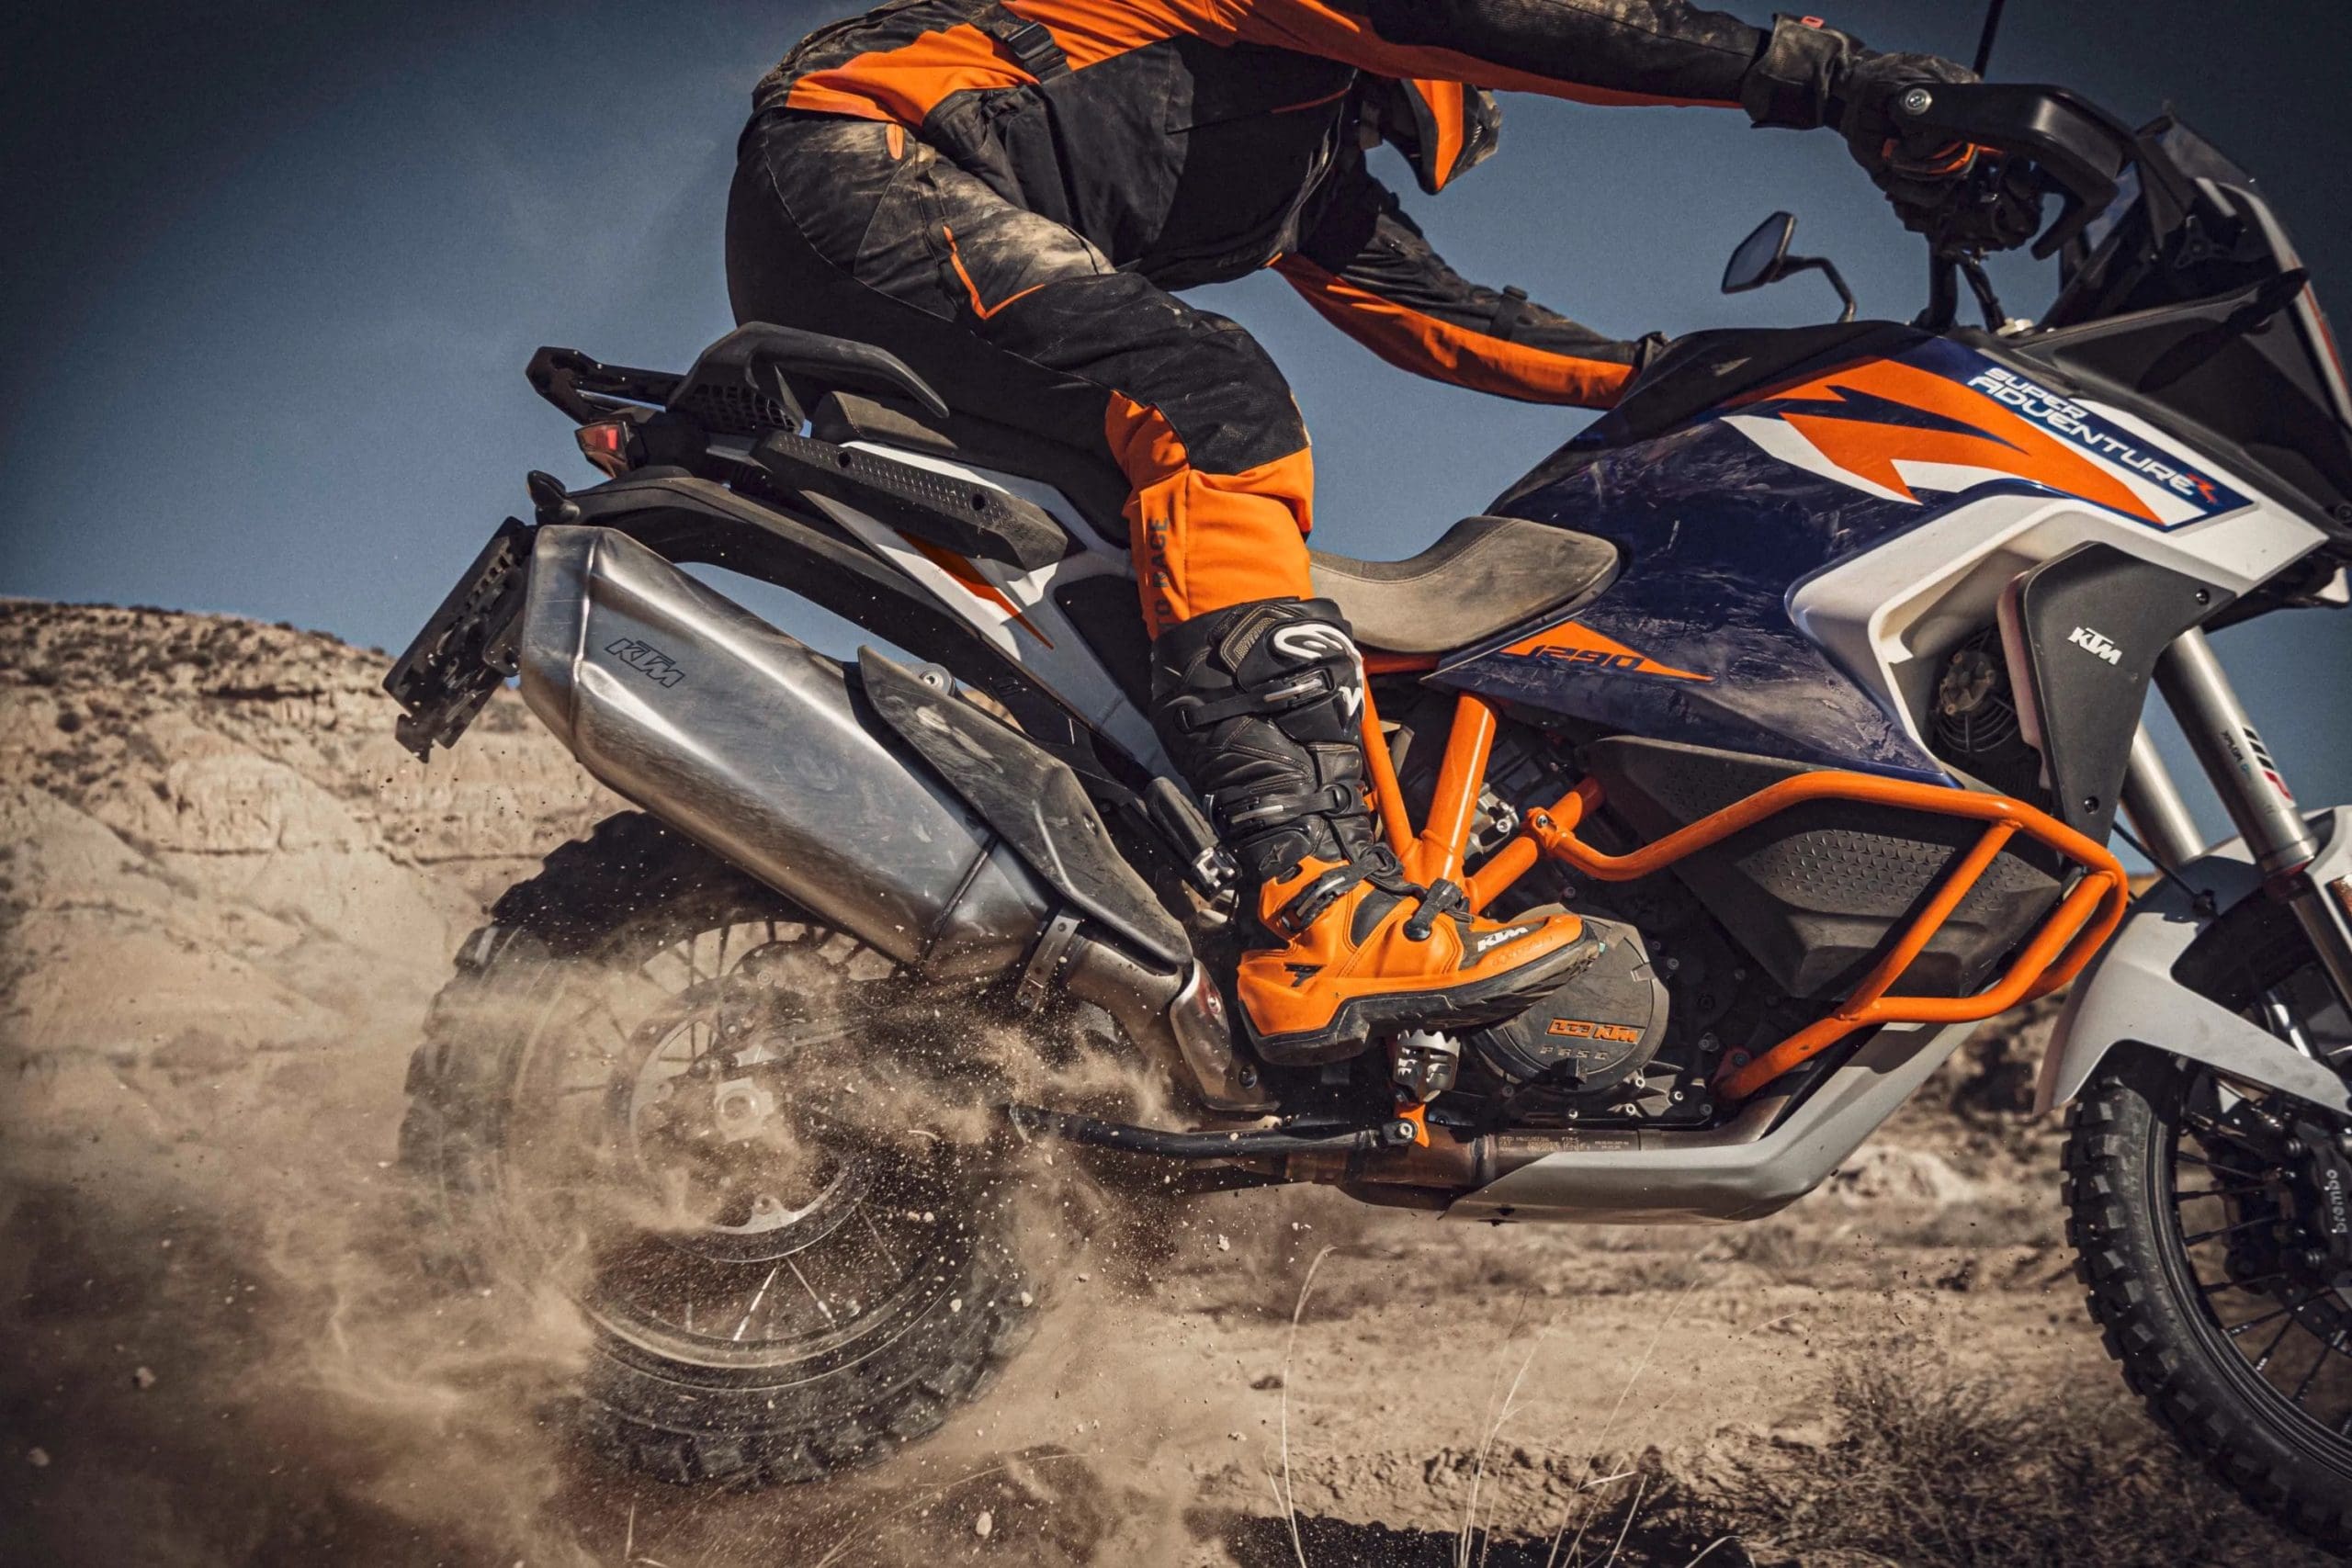 KTM Machines in the bid to figure out what the newest prototype from KTM is.